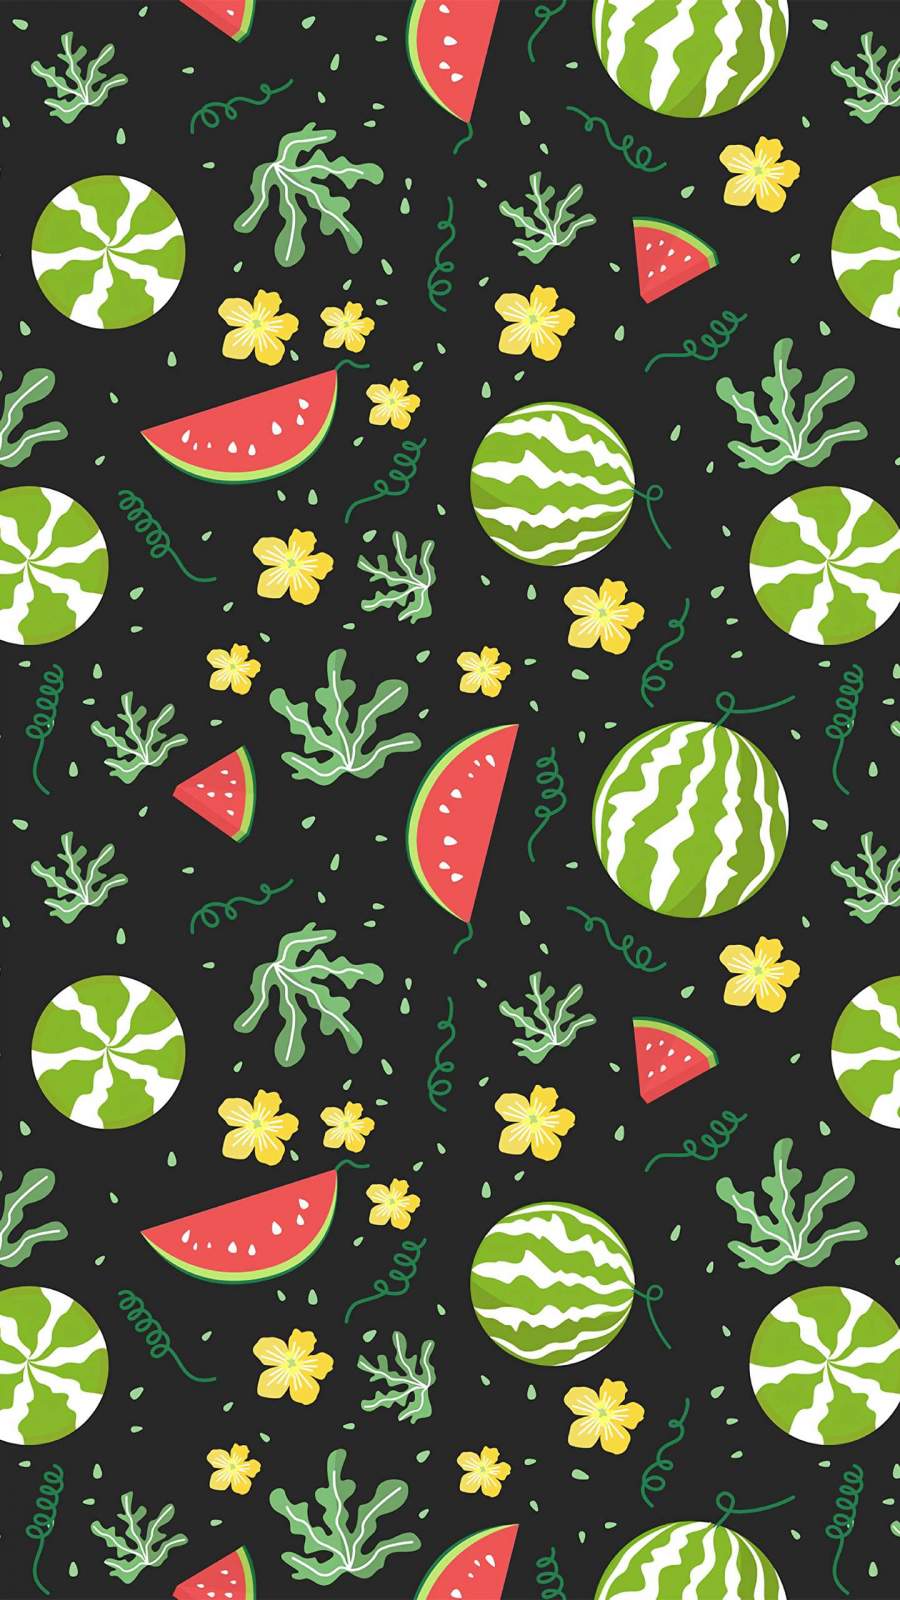 One slice watermelon water splash white background 1125x2436 iPhone 11  ProXSX wallpaper background picture image